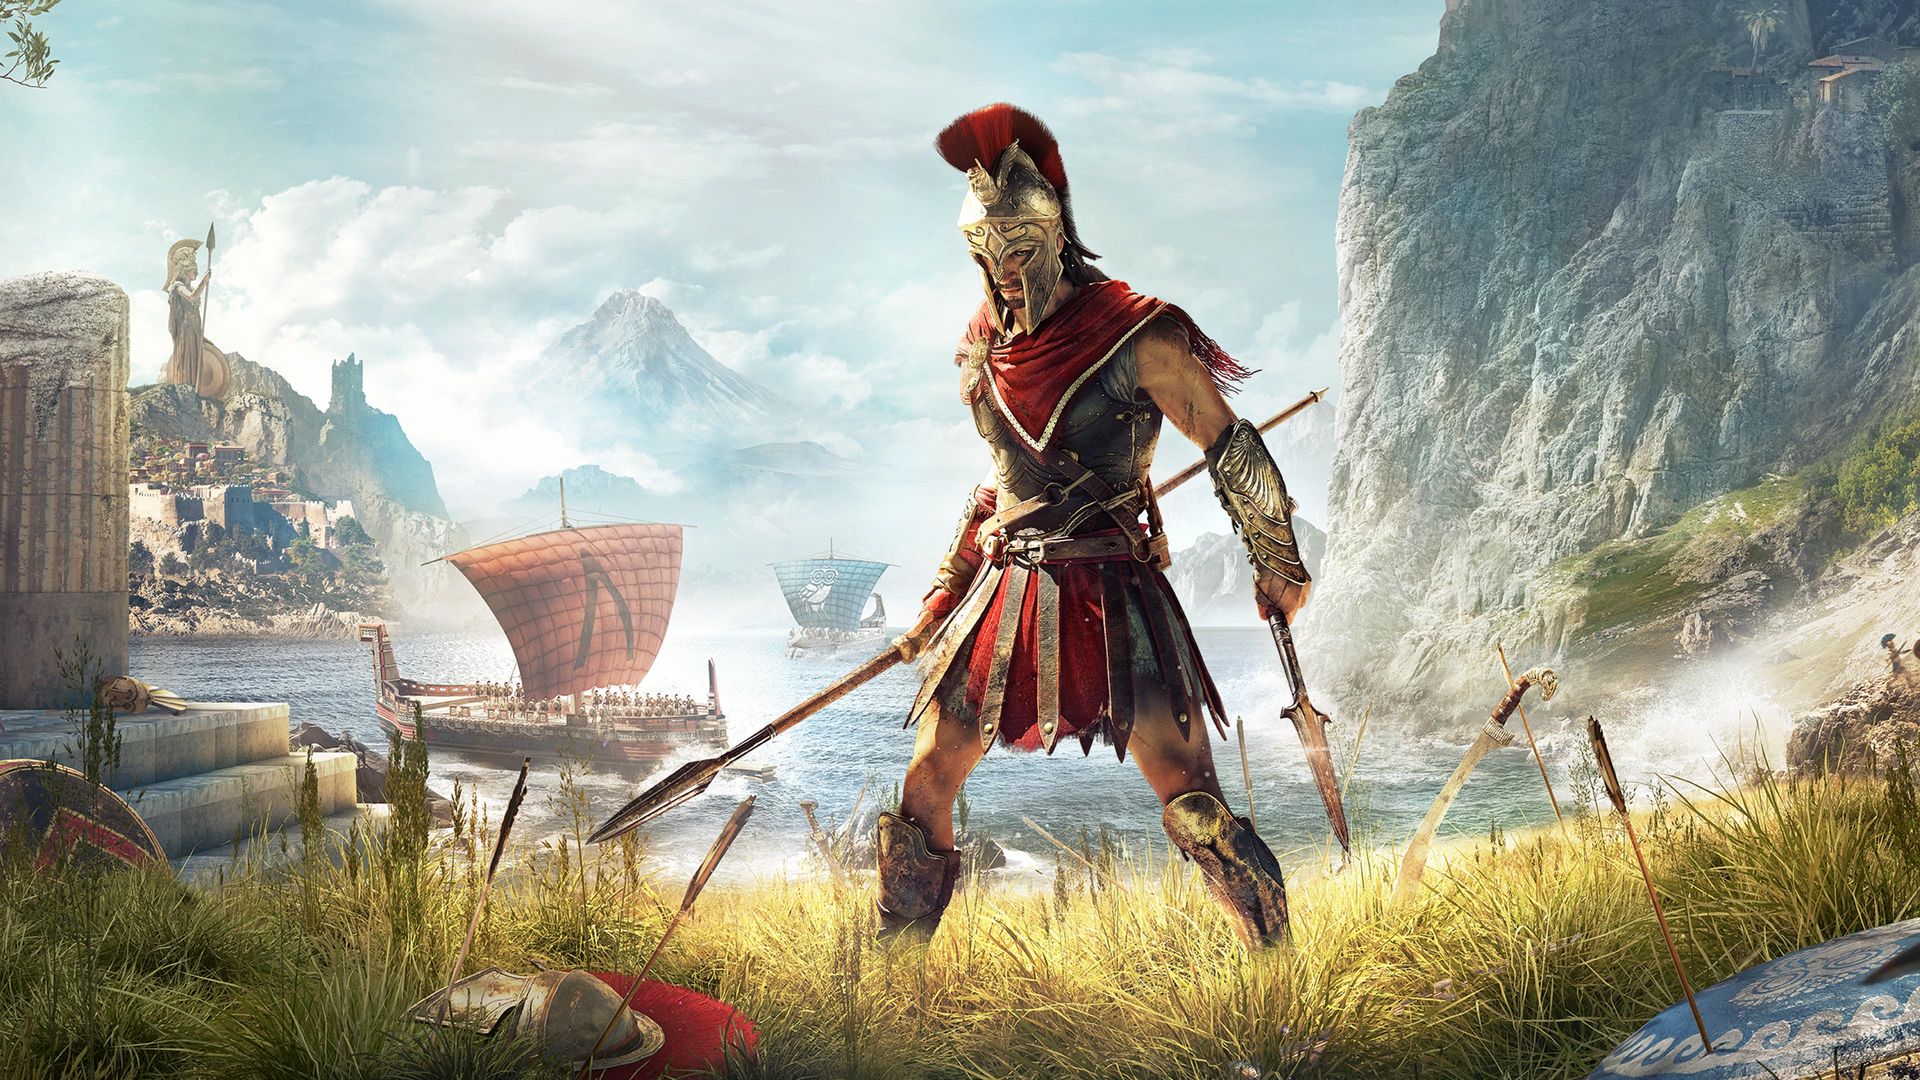 New Assassin's Creed to be revealed at Ubisoft Forward (including one set in Japan)